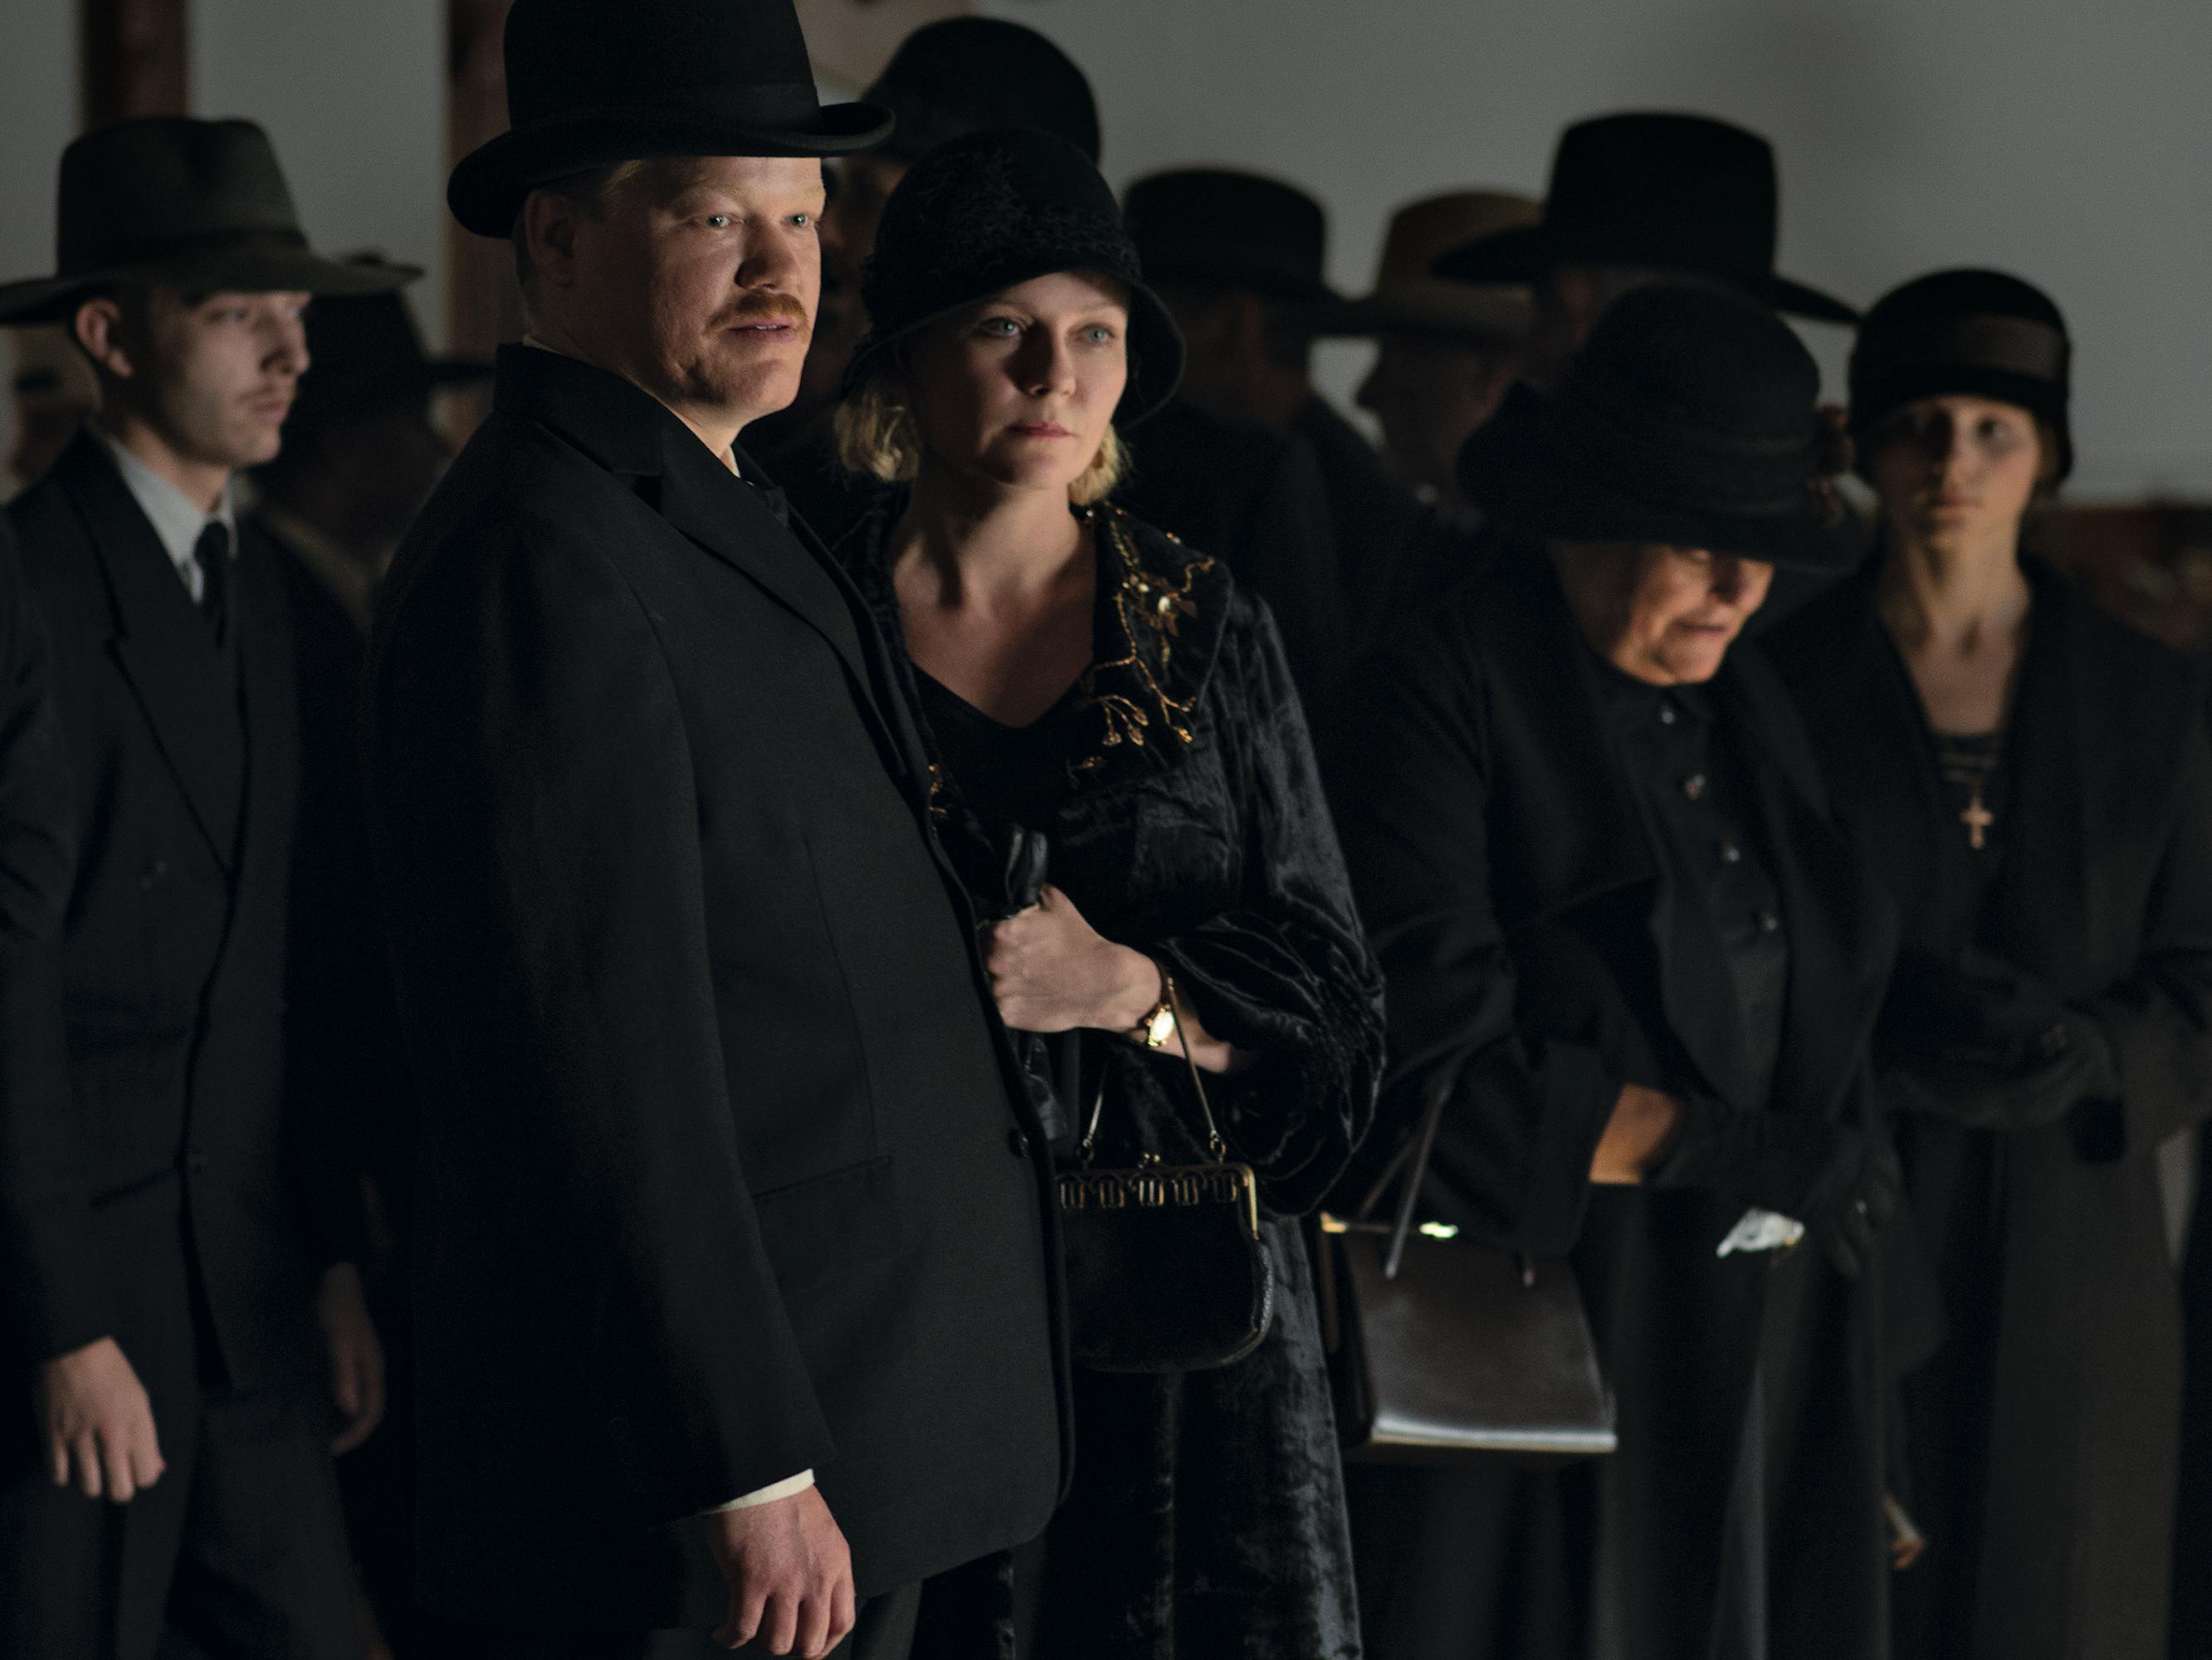 Jesse Plemons and Kirsten Dunst stand with a group of people wearing black outfits and black hats looking somber.